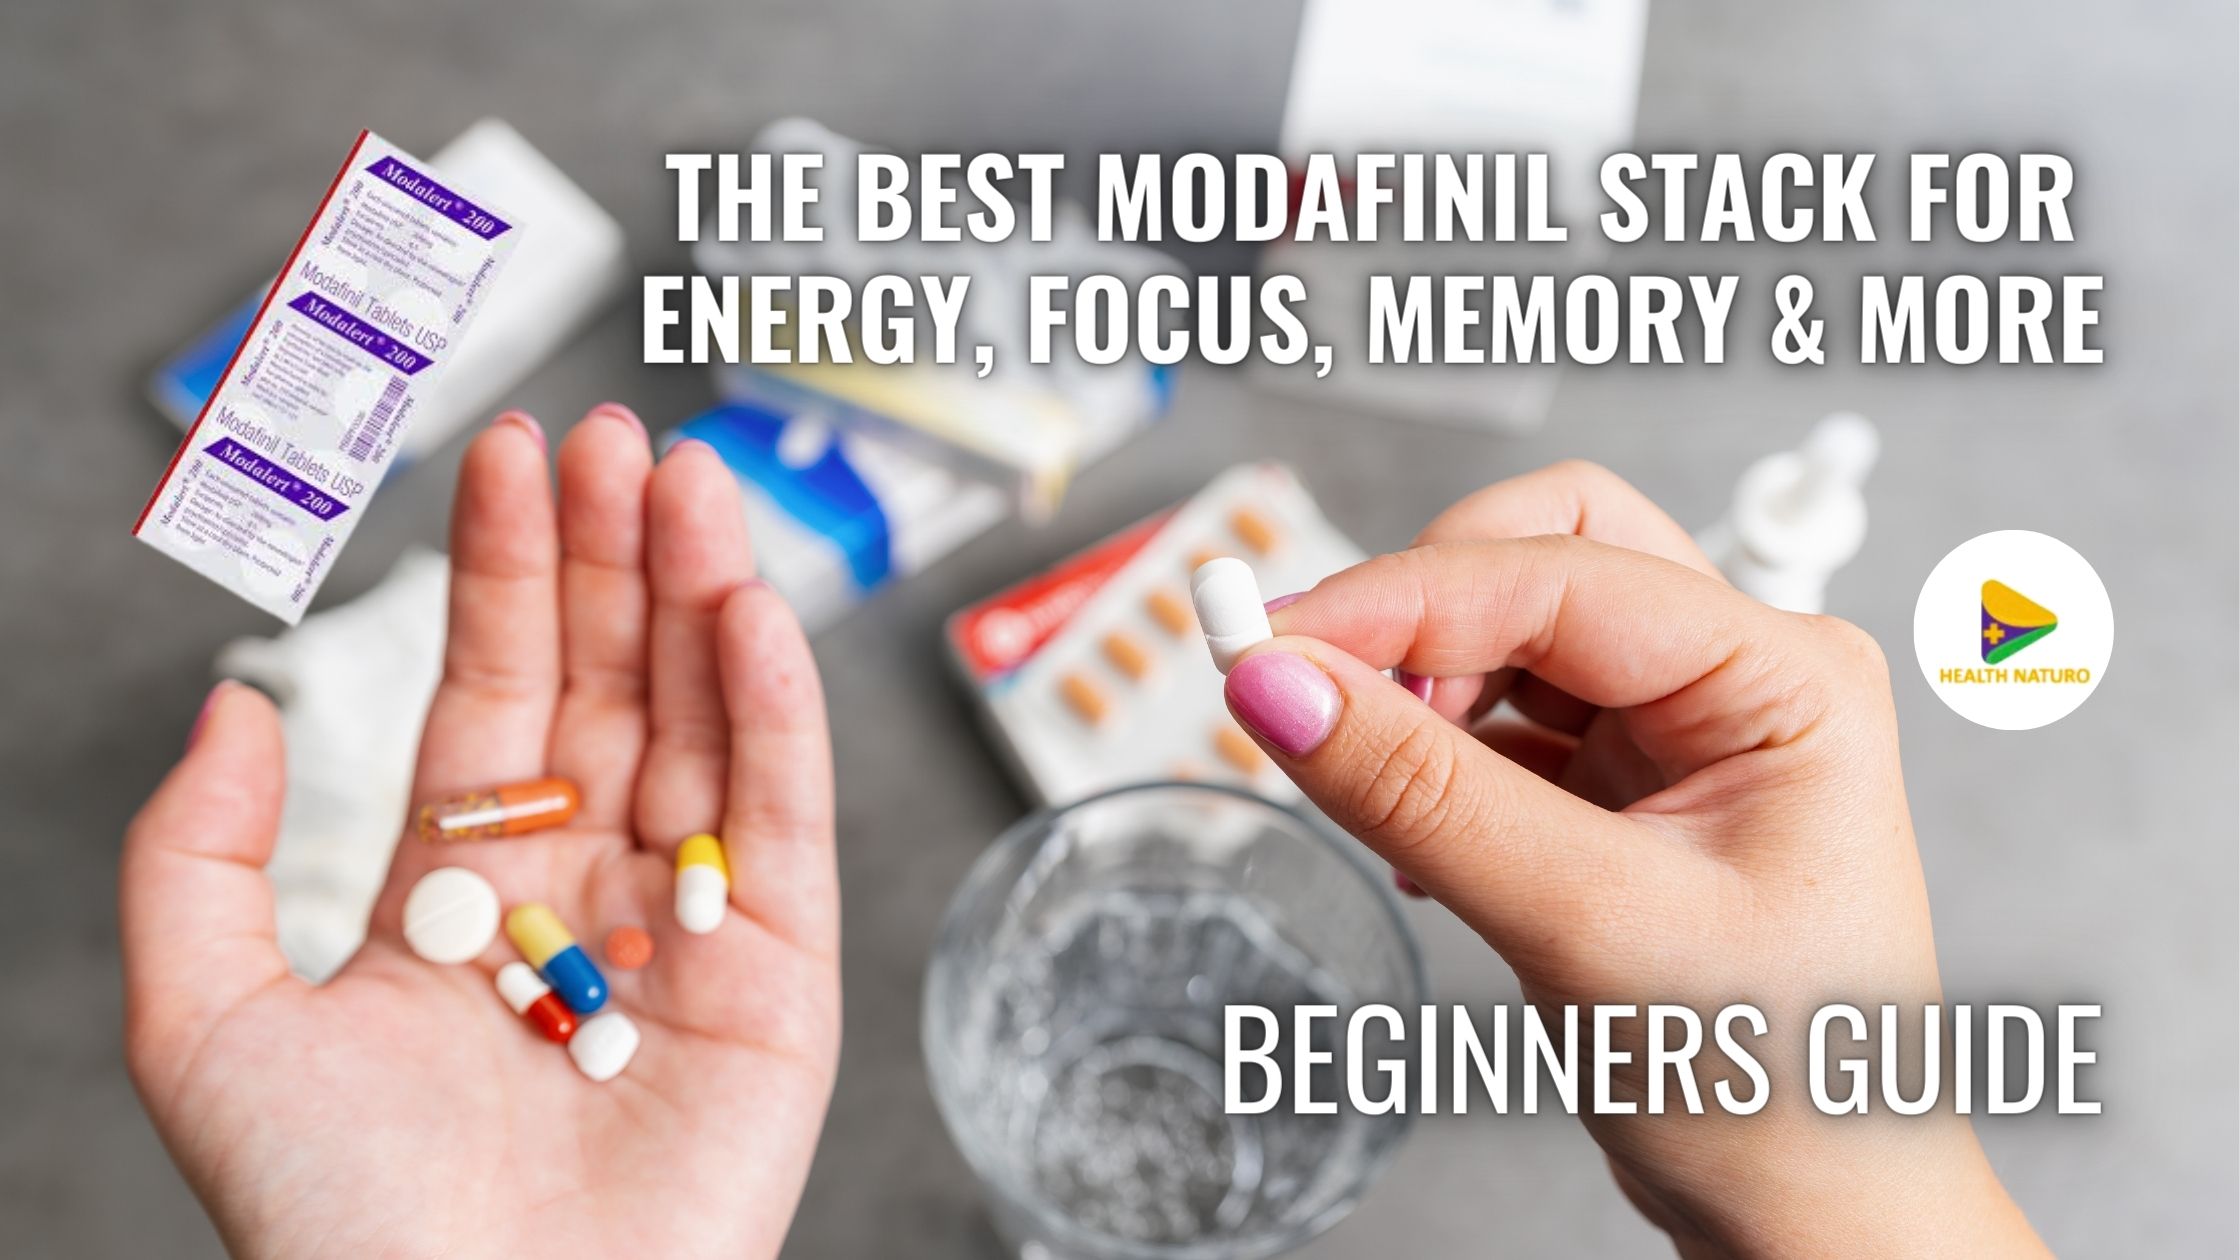 The Best Modafinil Stack For Energy, Focus, Memory And More- Beginners Guide